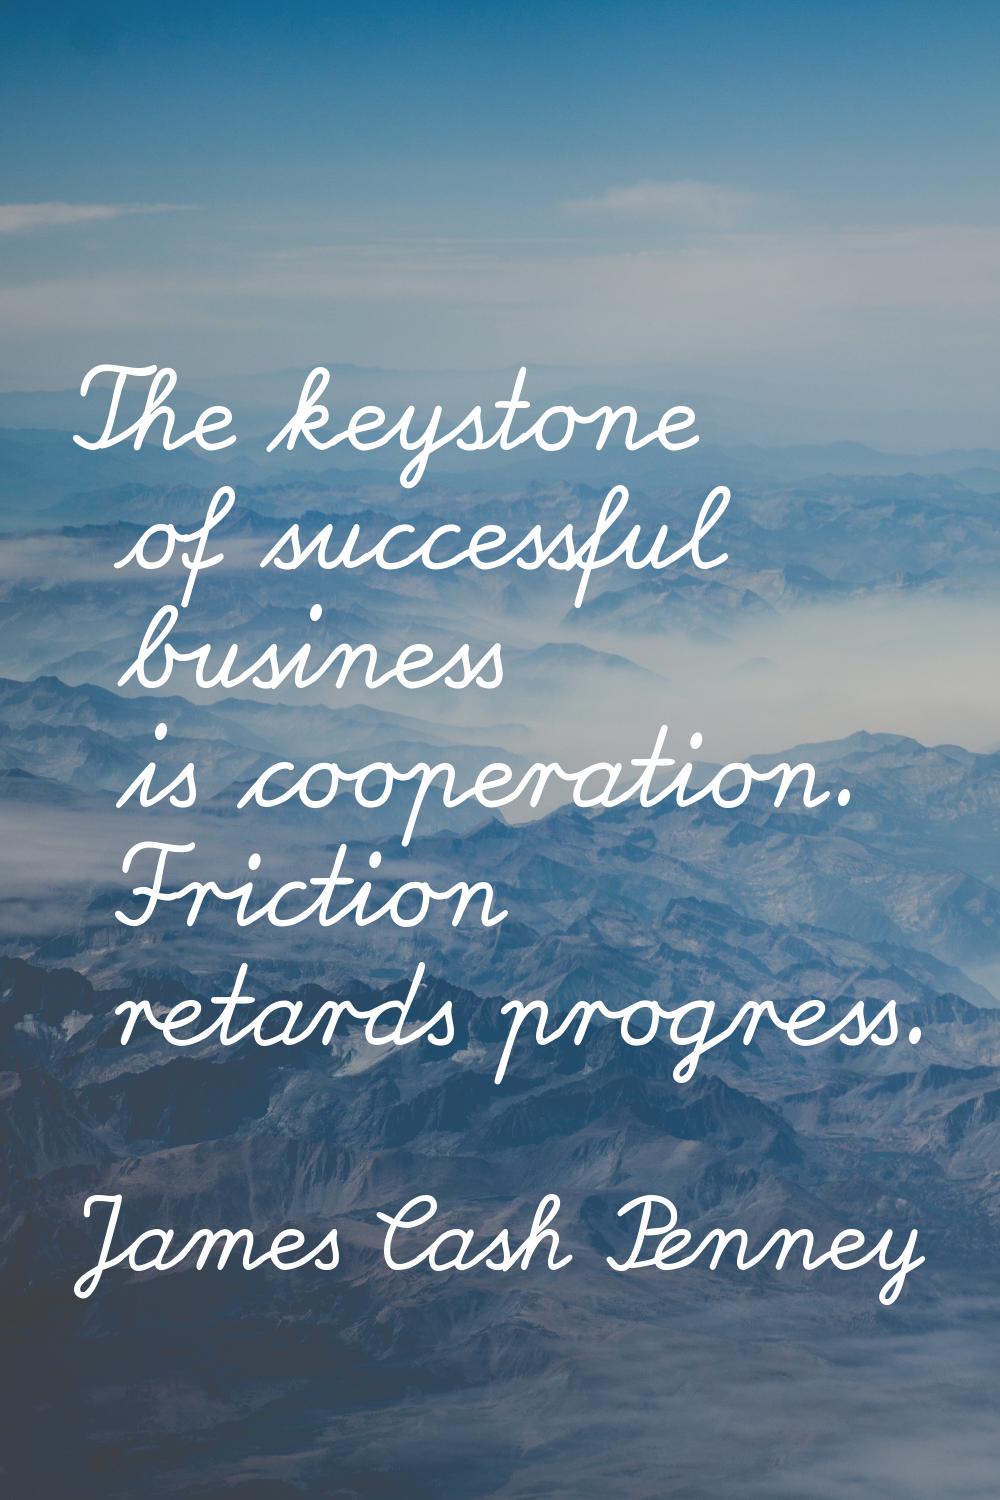 The keystone of successful business is cooperation. Friction retards progress.